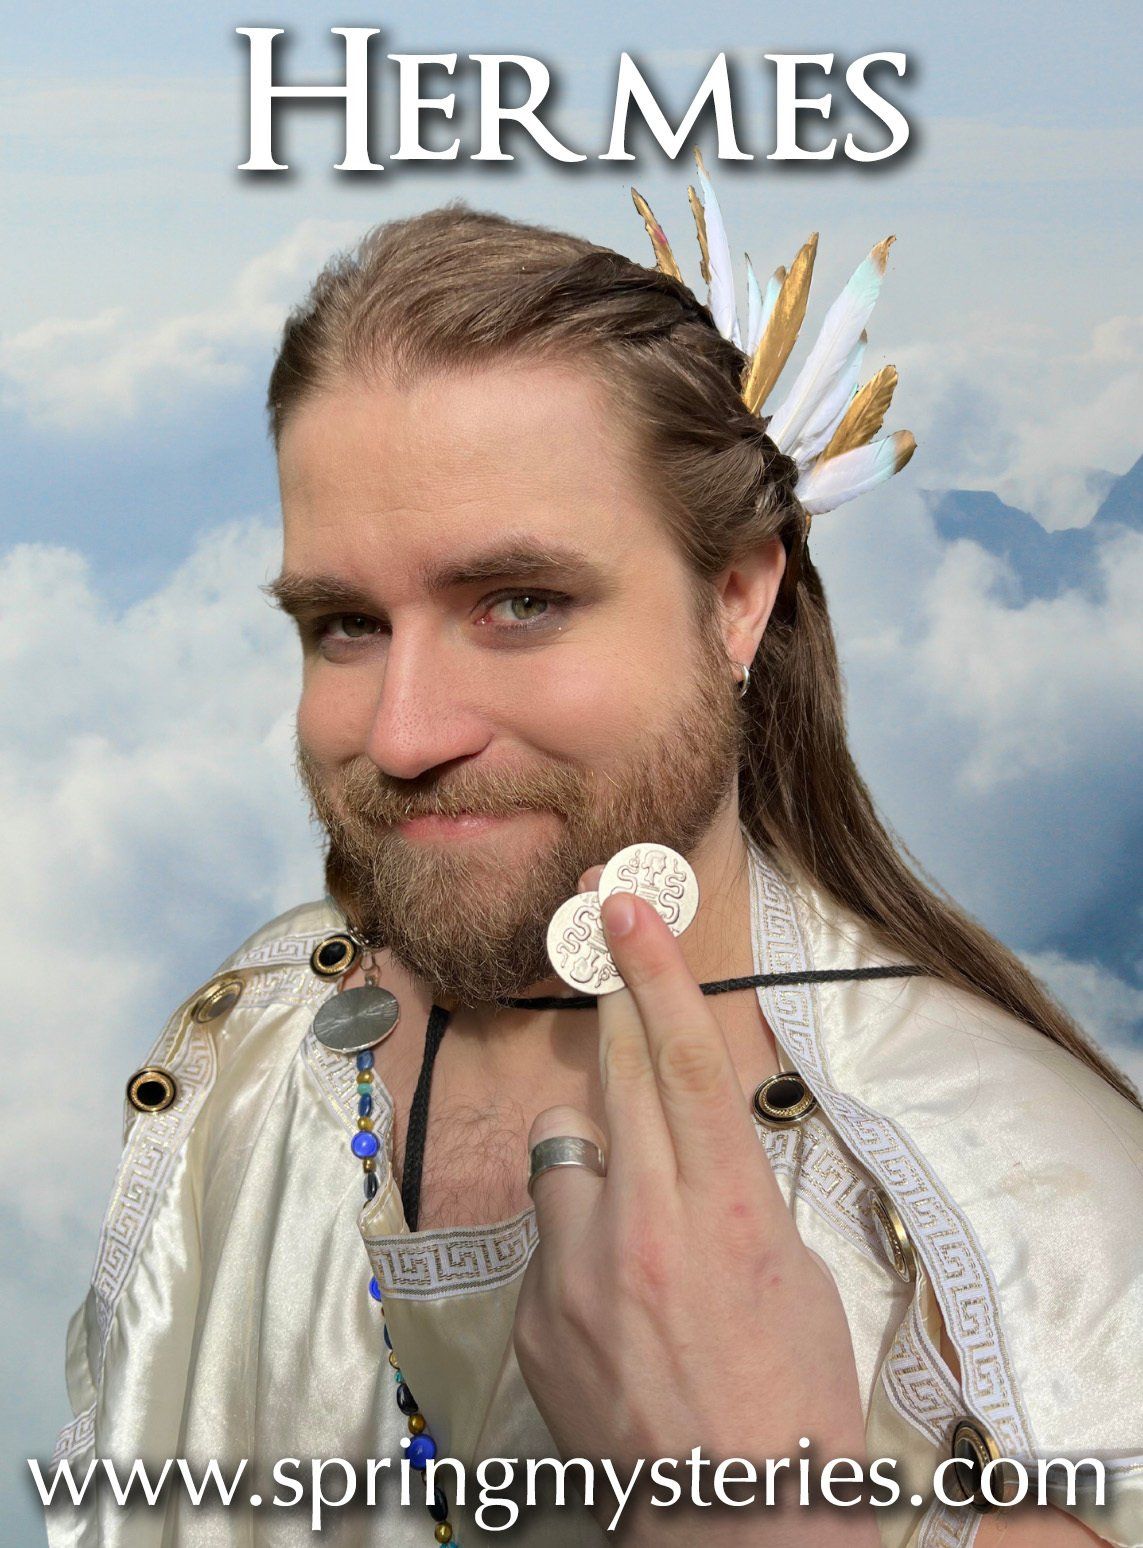 A man with long hair and a beard is wearing a Hermes costume, holding two coins